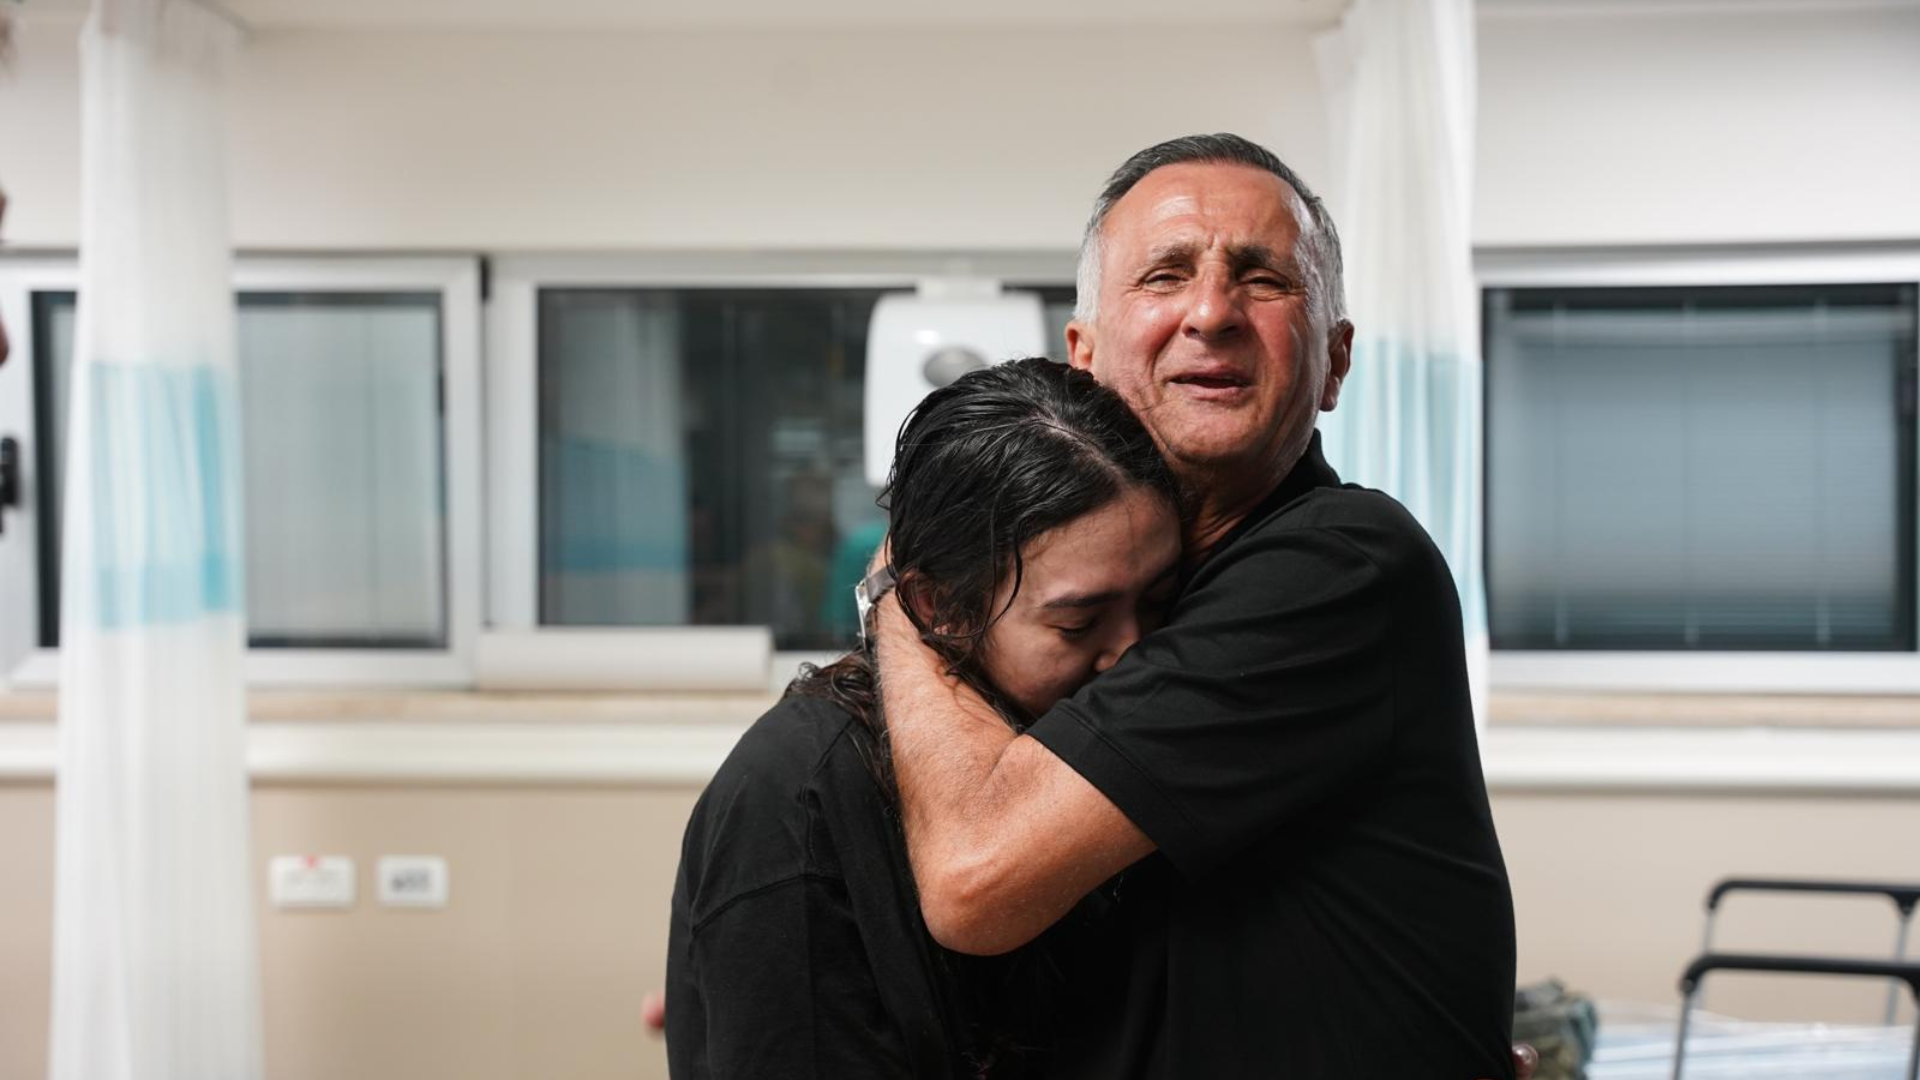 Watch Here : Heartwarming Video Shows Noa Argamni’s Emotional Reunion With Her Father After Being Freed From Hamas